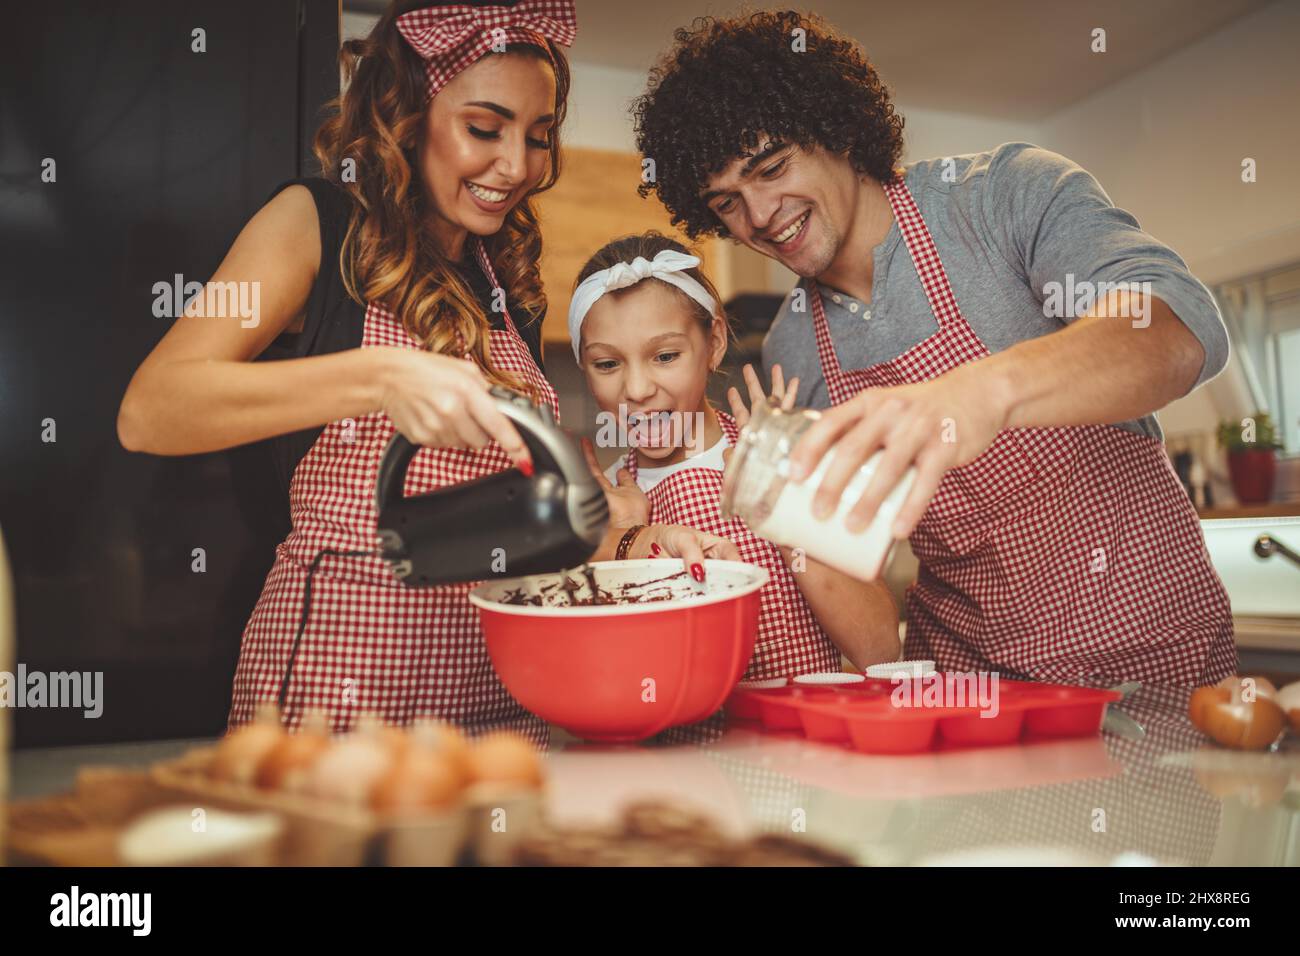 Happy parents and their daughter are preparing cookies together in the kitchen. Little girl helps to her parents mixing dough with mixer. Stock Photo